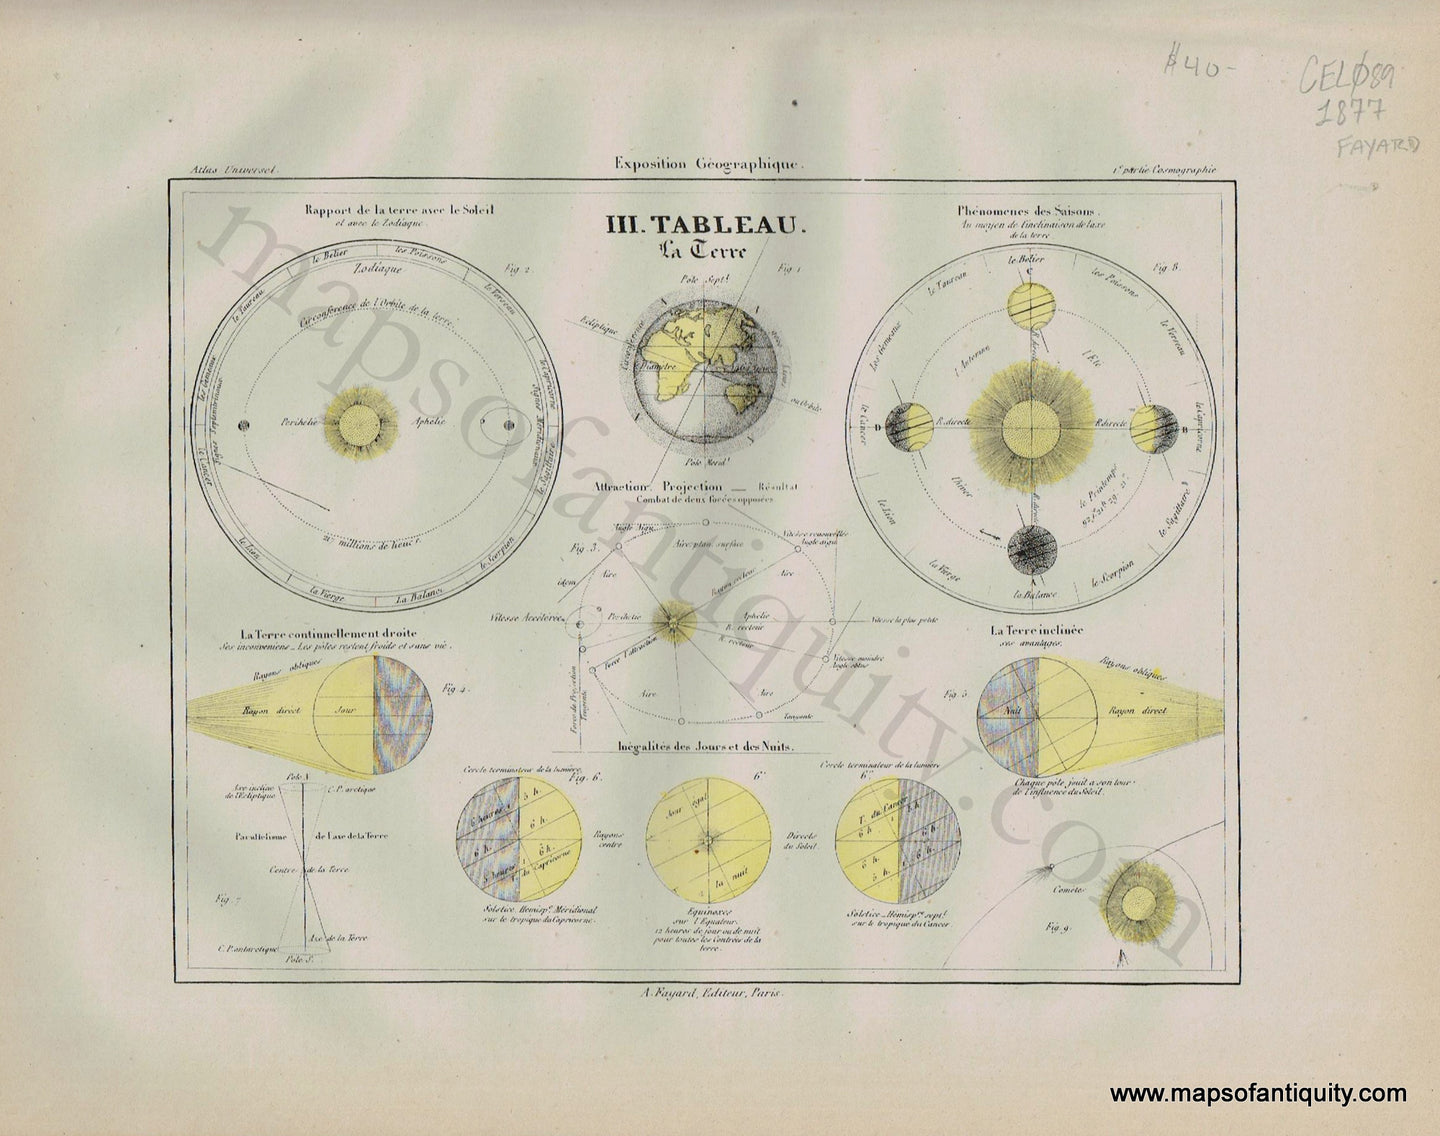 Antique-Map-III-Tableau-La-Terre-Celestial-Constellation-Stars-Star-Astronomy-Diagram-Fayard-Atlas-Universel-French-1877-1870s-1800s-Mid-Late-19th-Century-Maps-of-Antiquity